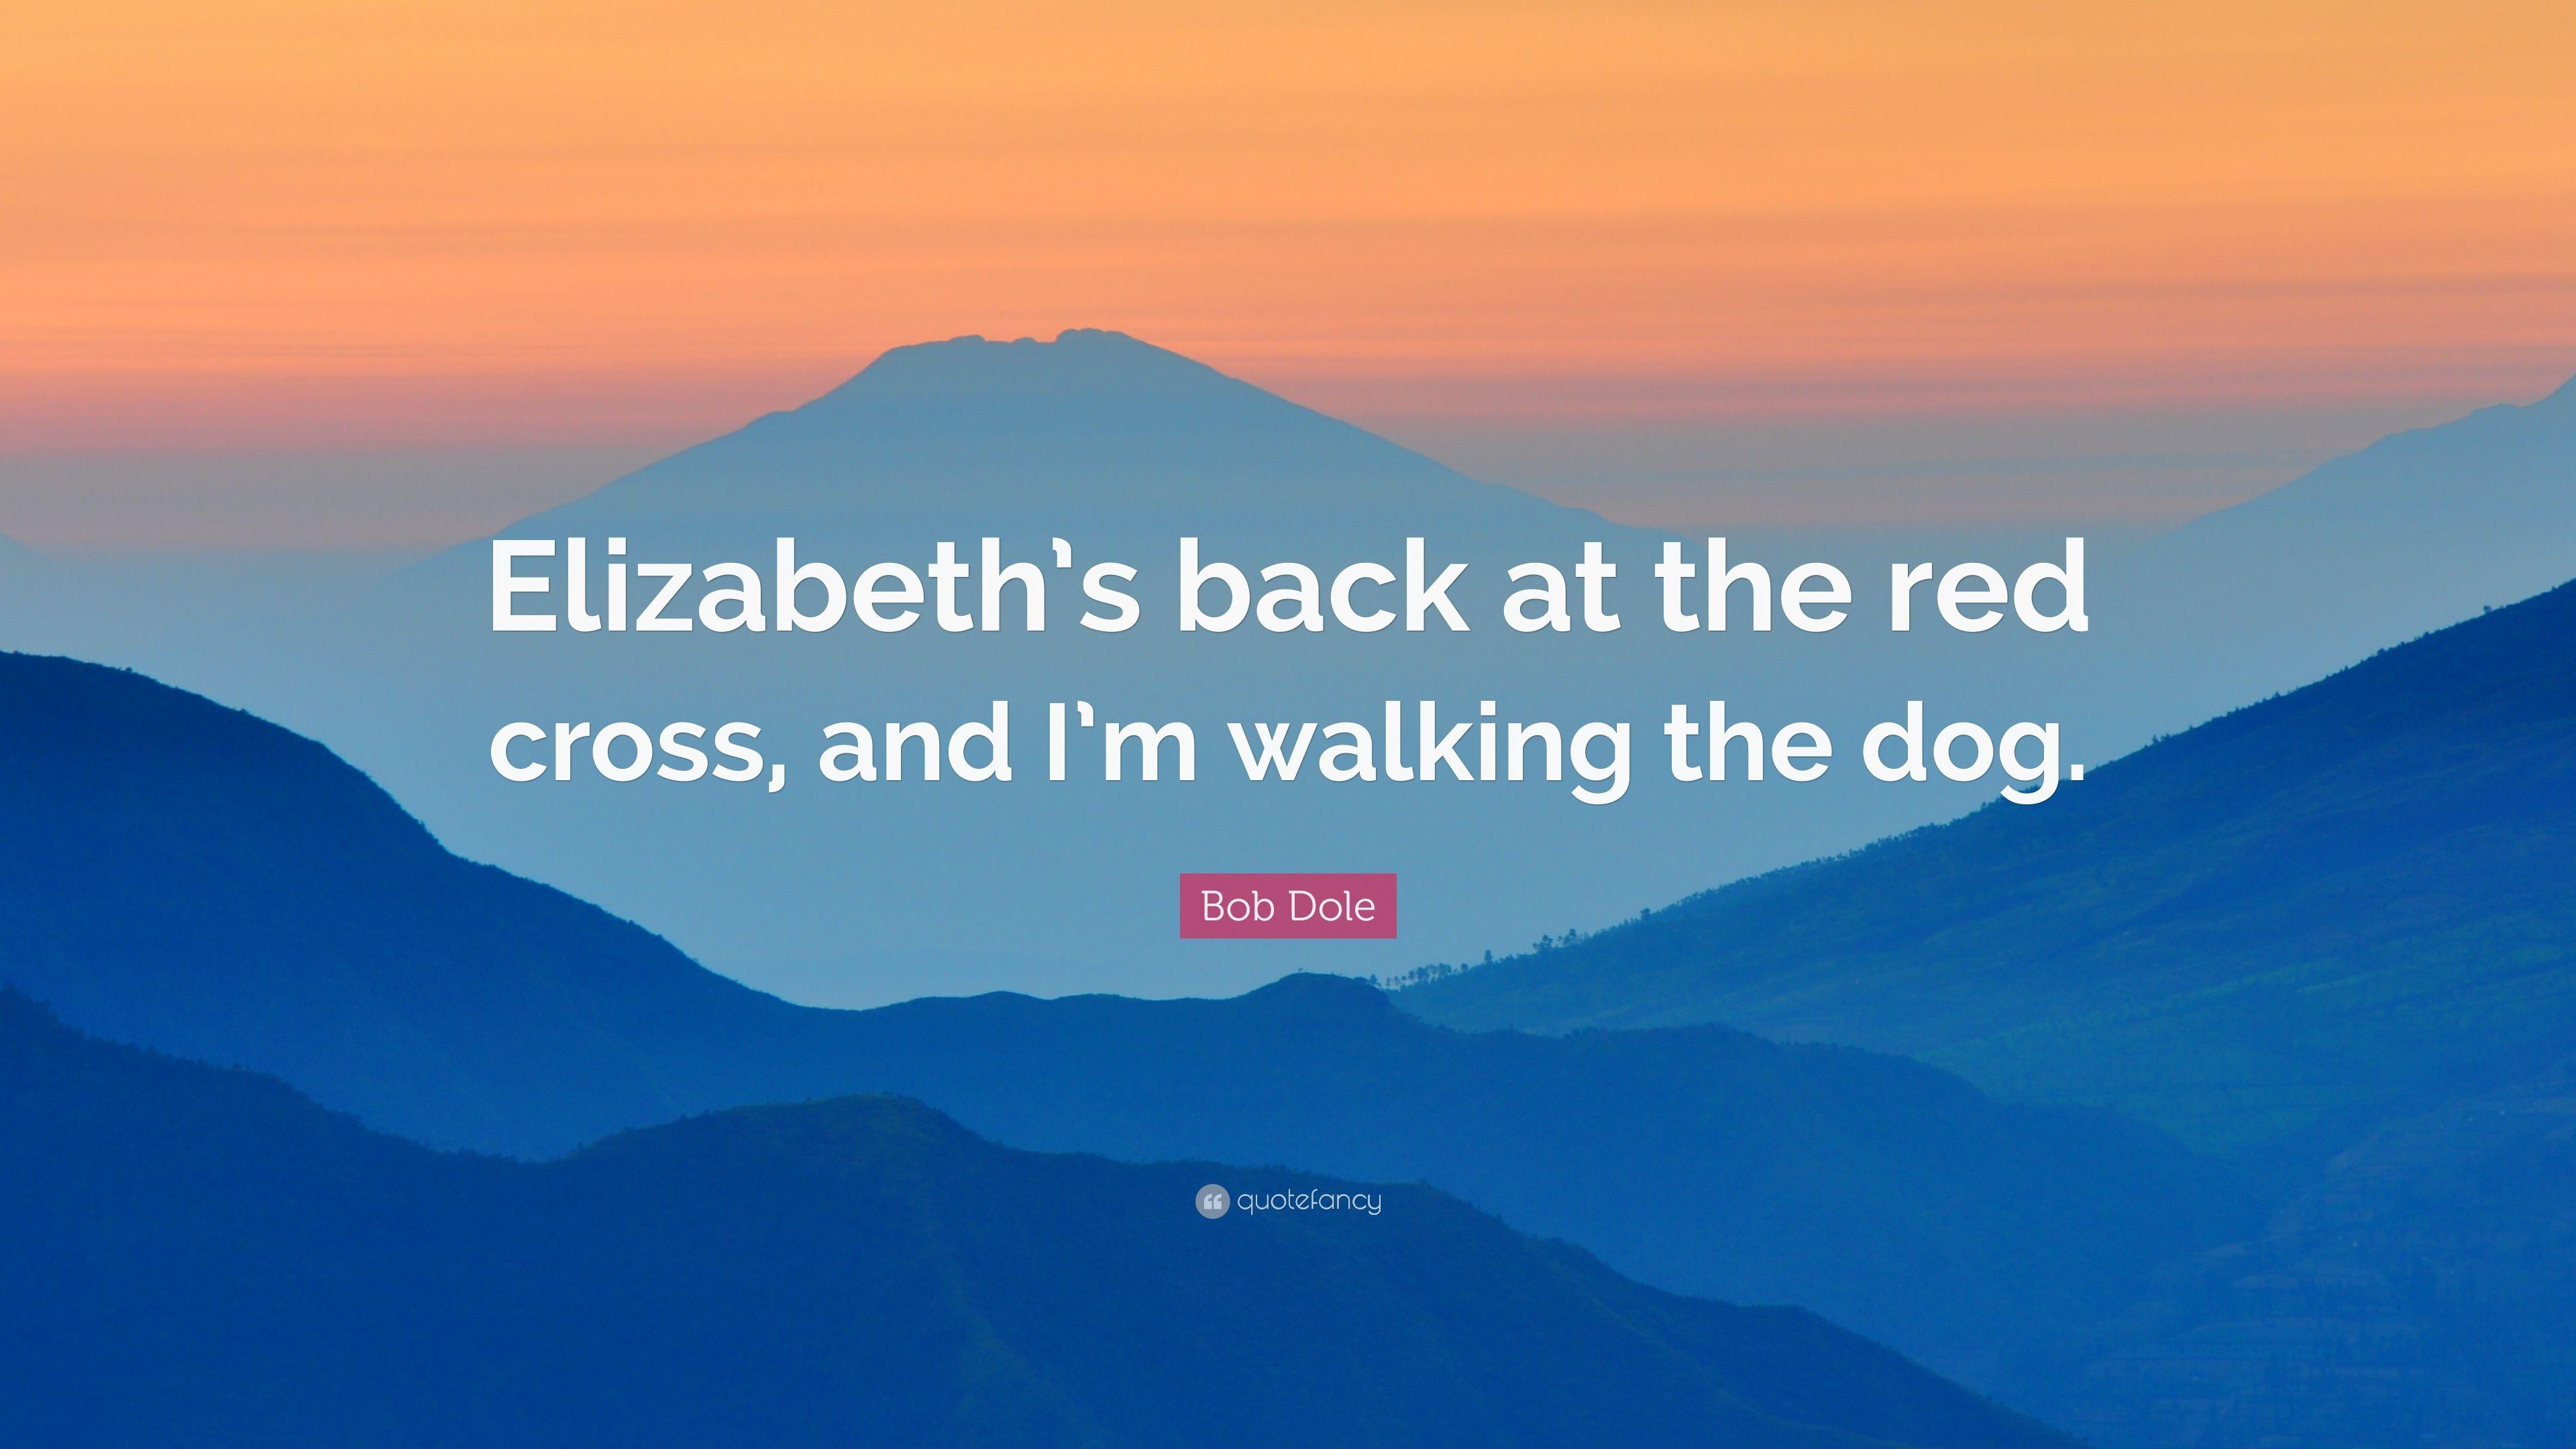 Bob Dole Quote: “Elizabeth's back at the red cross, and I'm walking